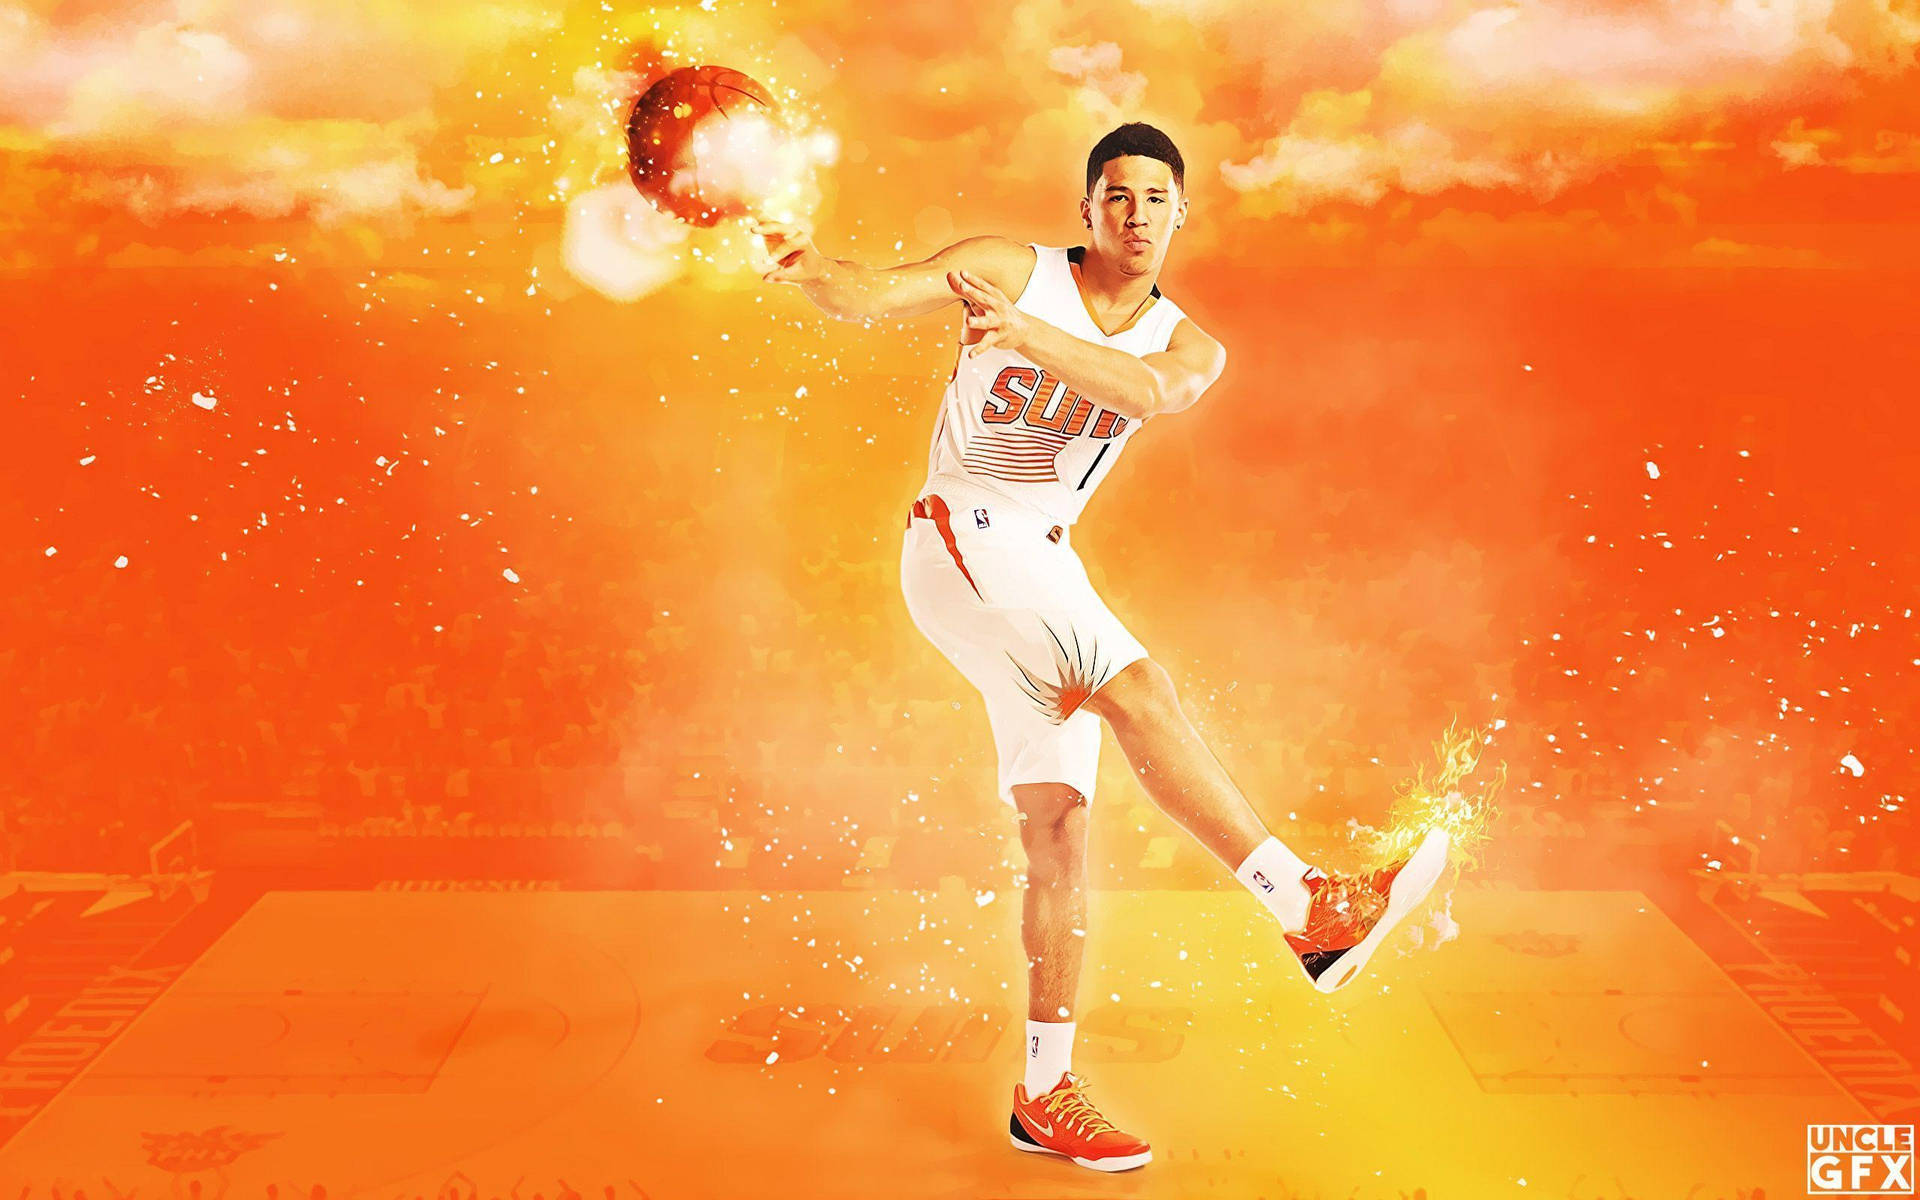 Top 999+ Devin Booker Wallpaper Full HD, 4K✅Free to Use